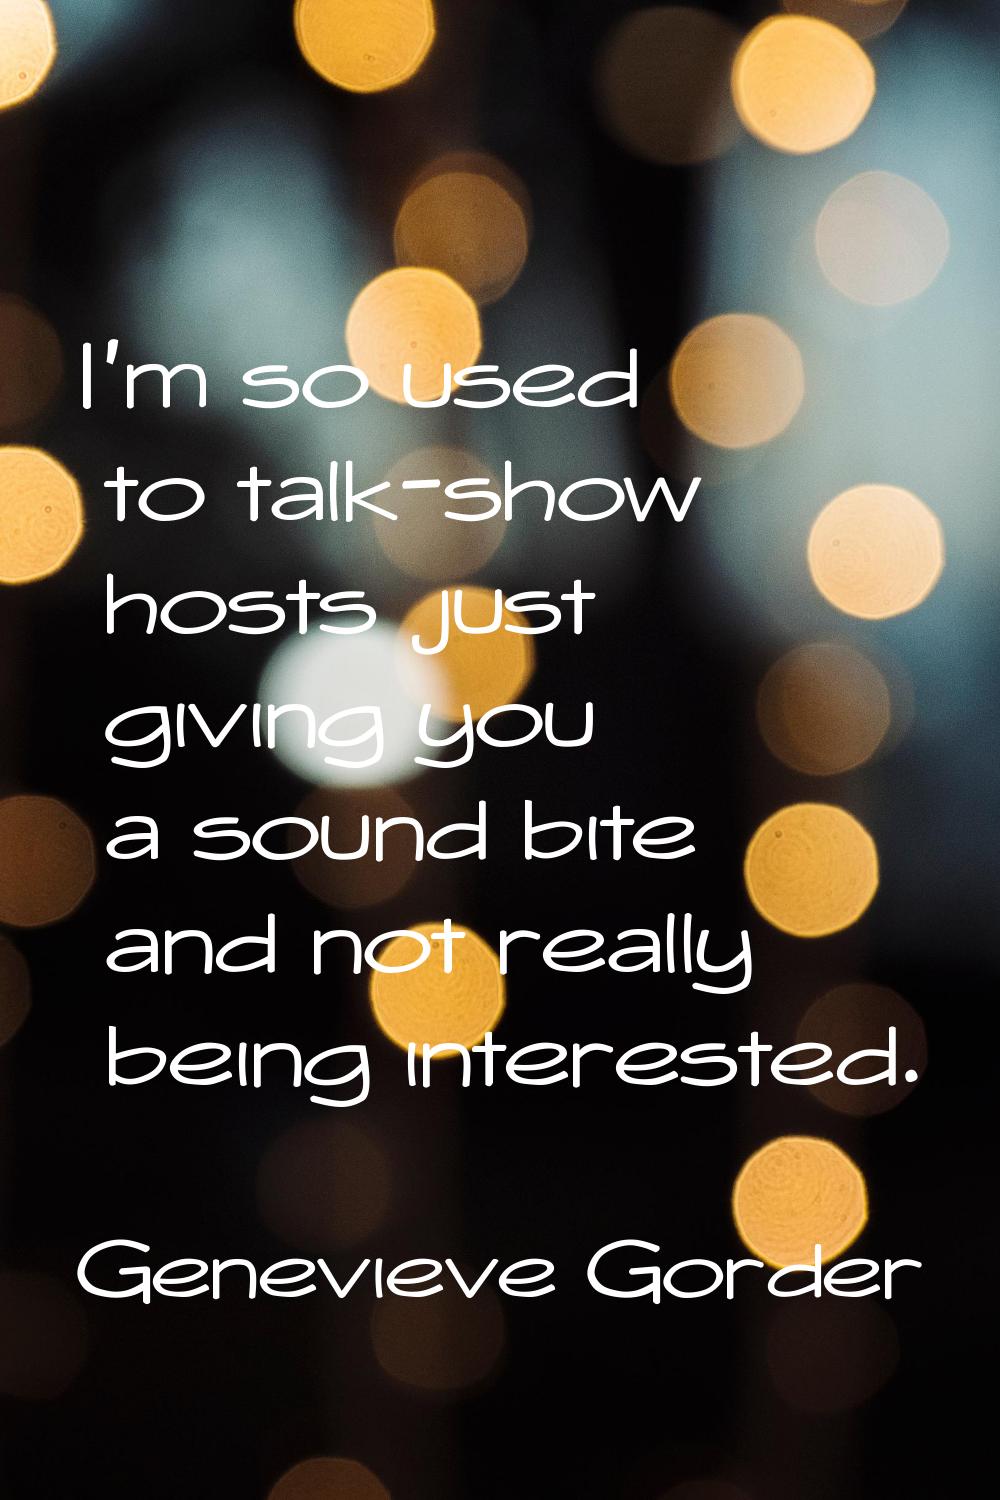 I'm so used to talk-show hosts just giving you a sound bite and not really being interested.